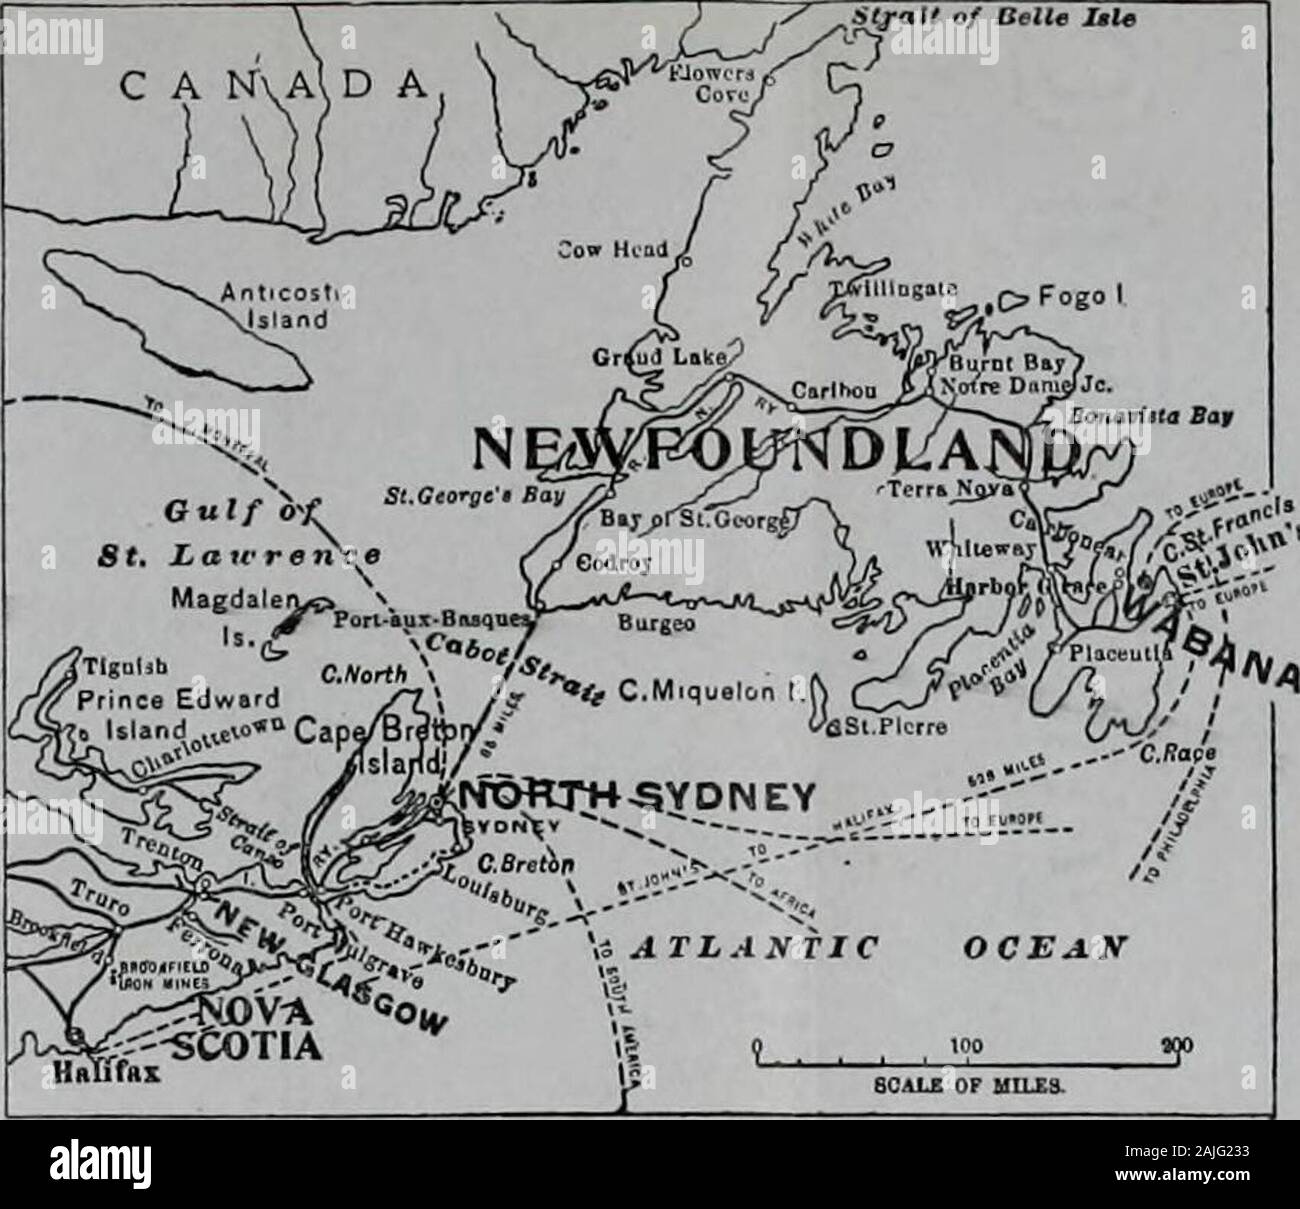 Transactions . SYDNEY HARBOUR^, and Vicinity. CAPE BRETON ISLAND, NOVA  SCOTIA. ! t ? SCALE OF UJLEa. Sketch Maps showing situations of  re-spectively Wabana, Newfoundland, the sourceof the iron supply and North